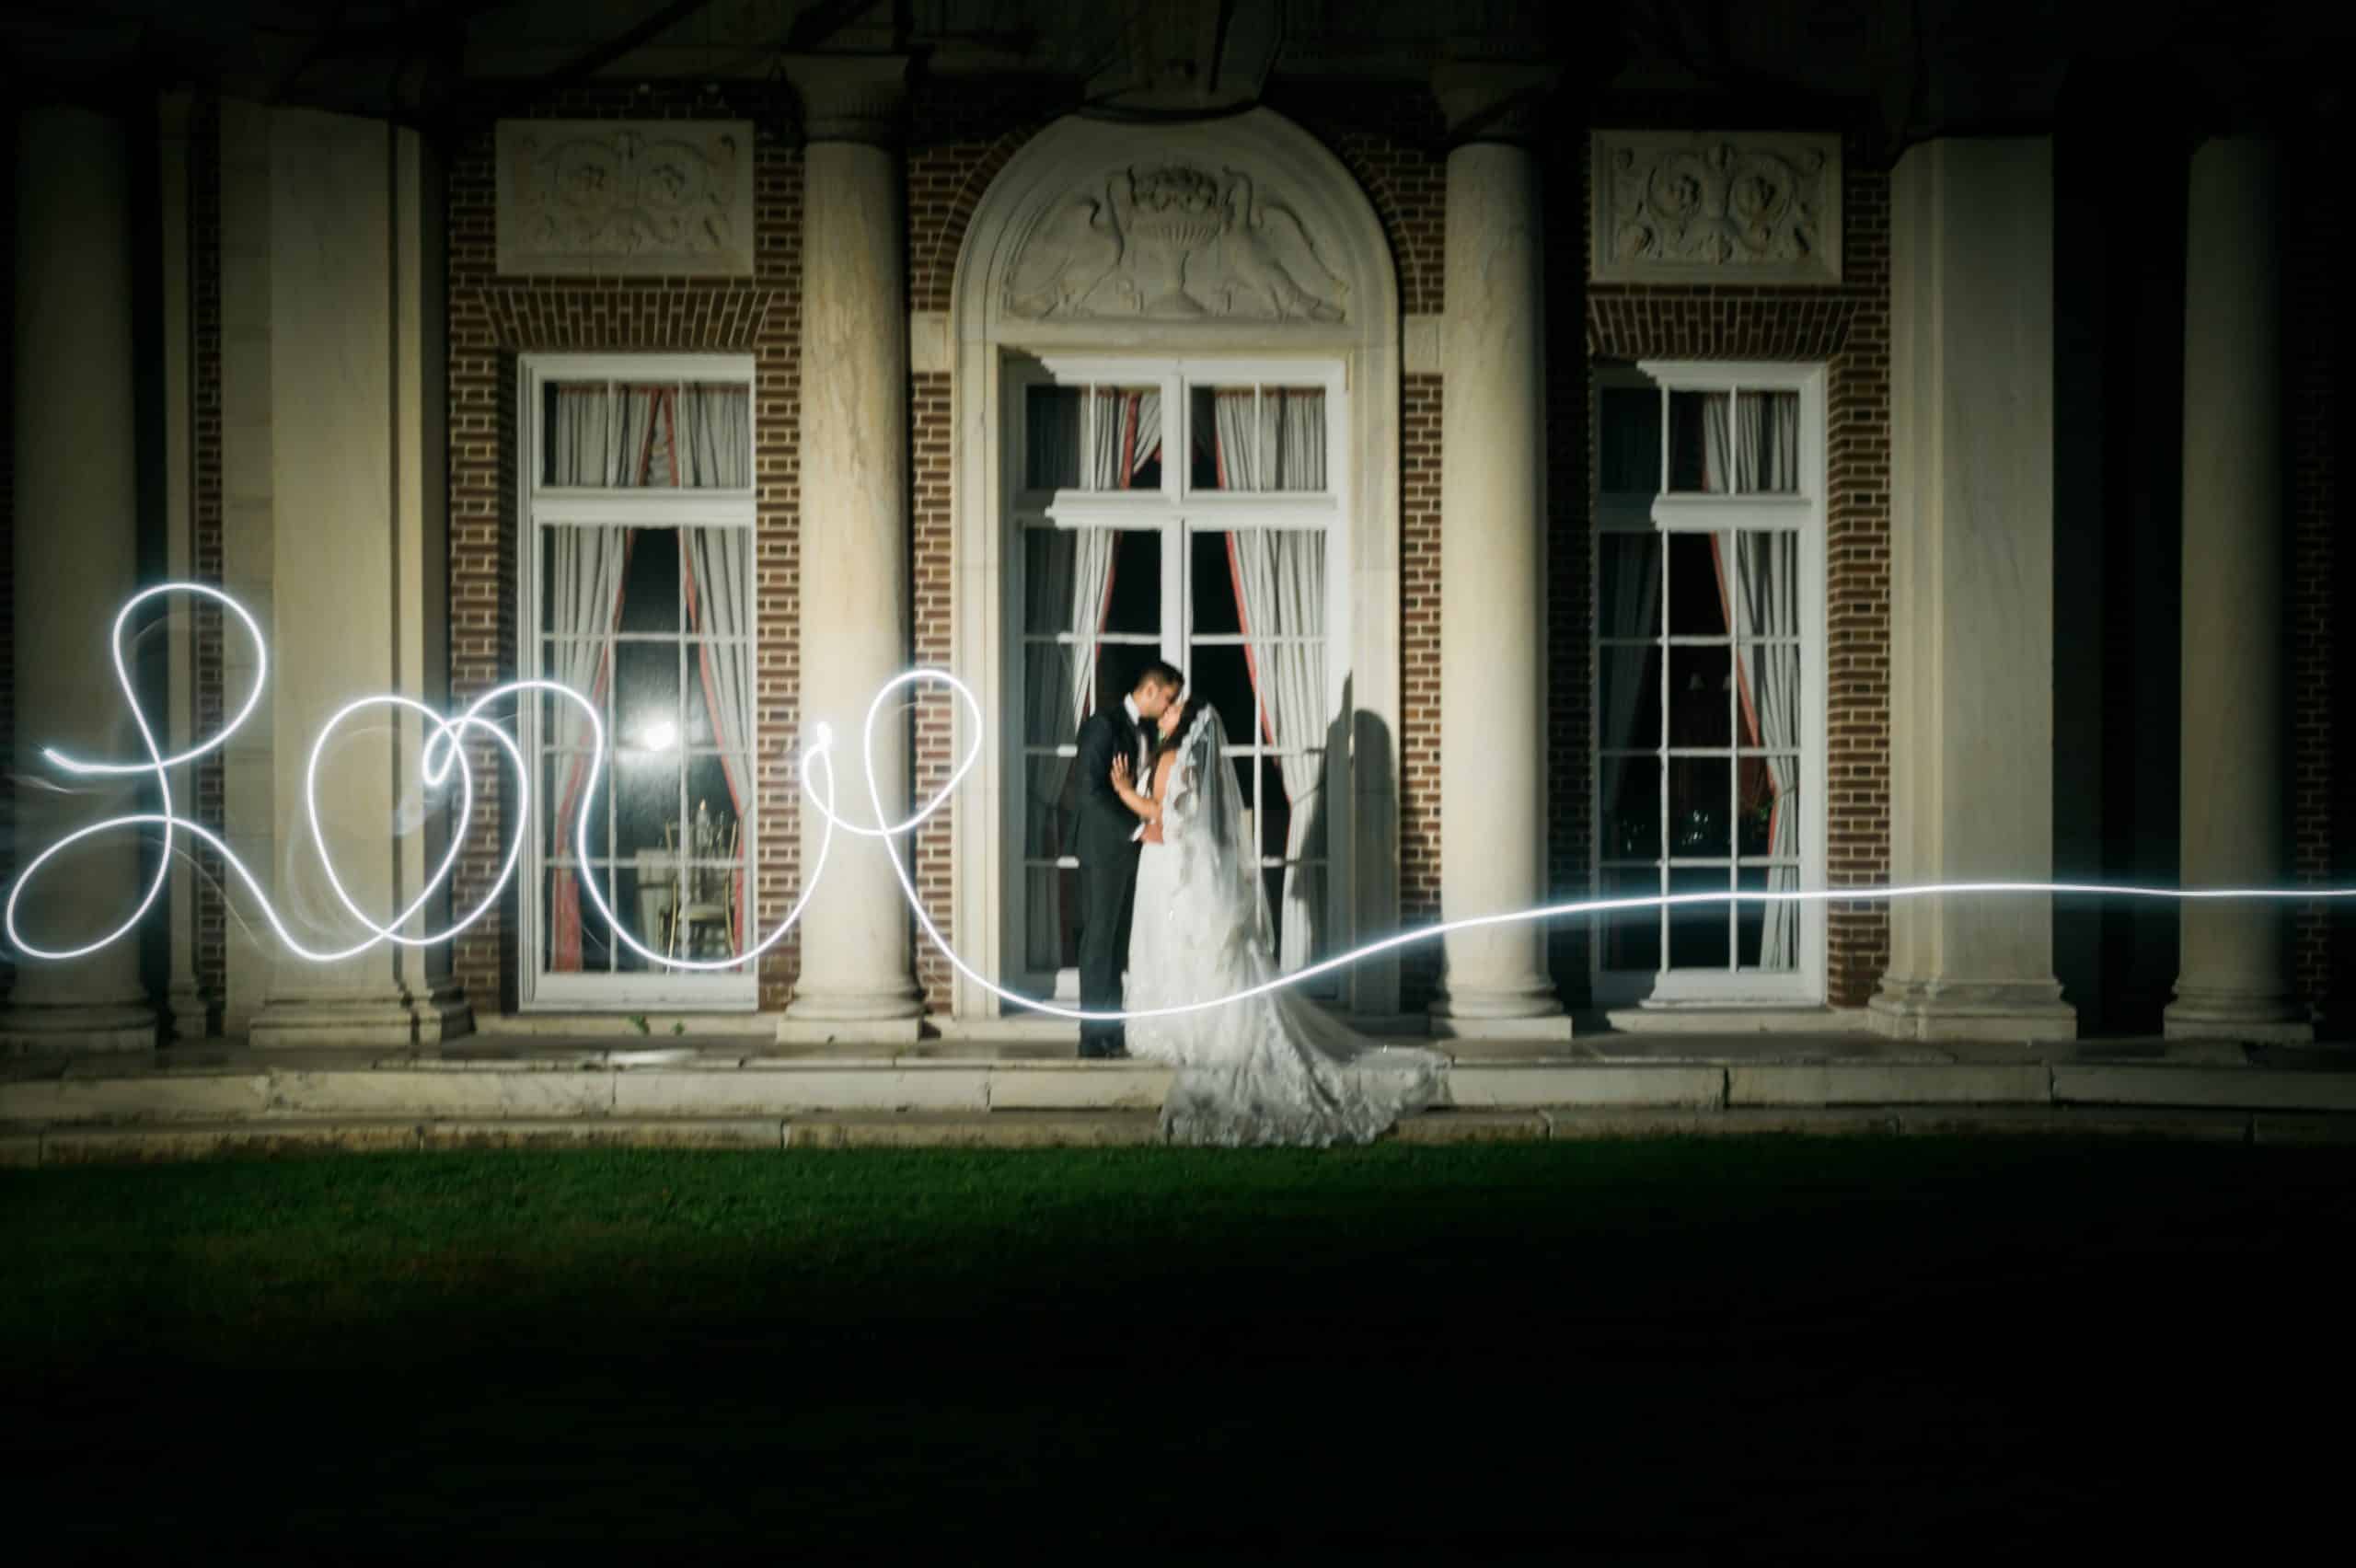 NYIT de Seversky Mansion wedding in Long Island, captured by Long Island photodocumentary wedding photographer Ben Lau.